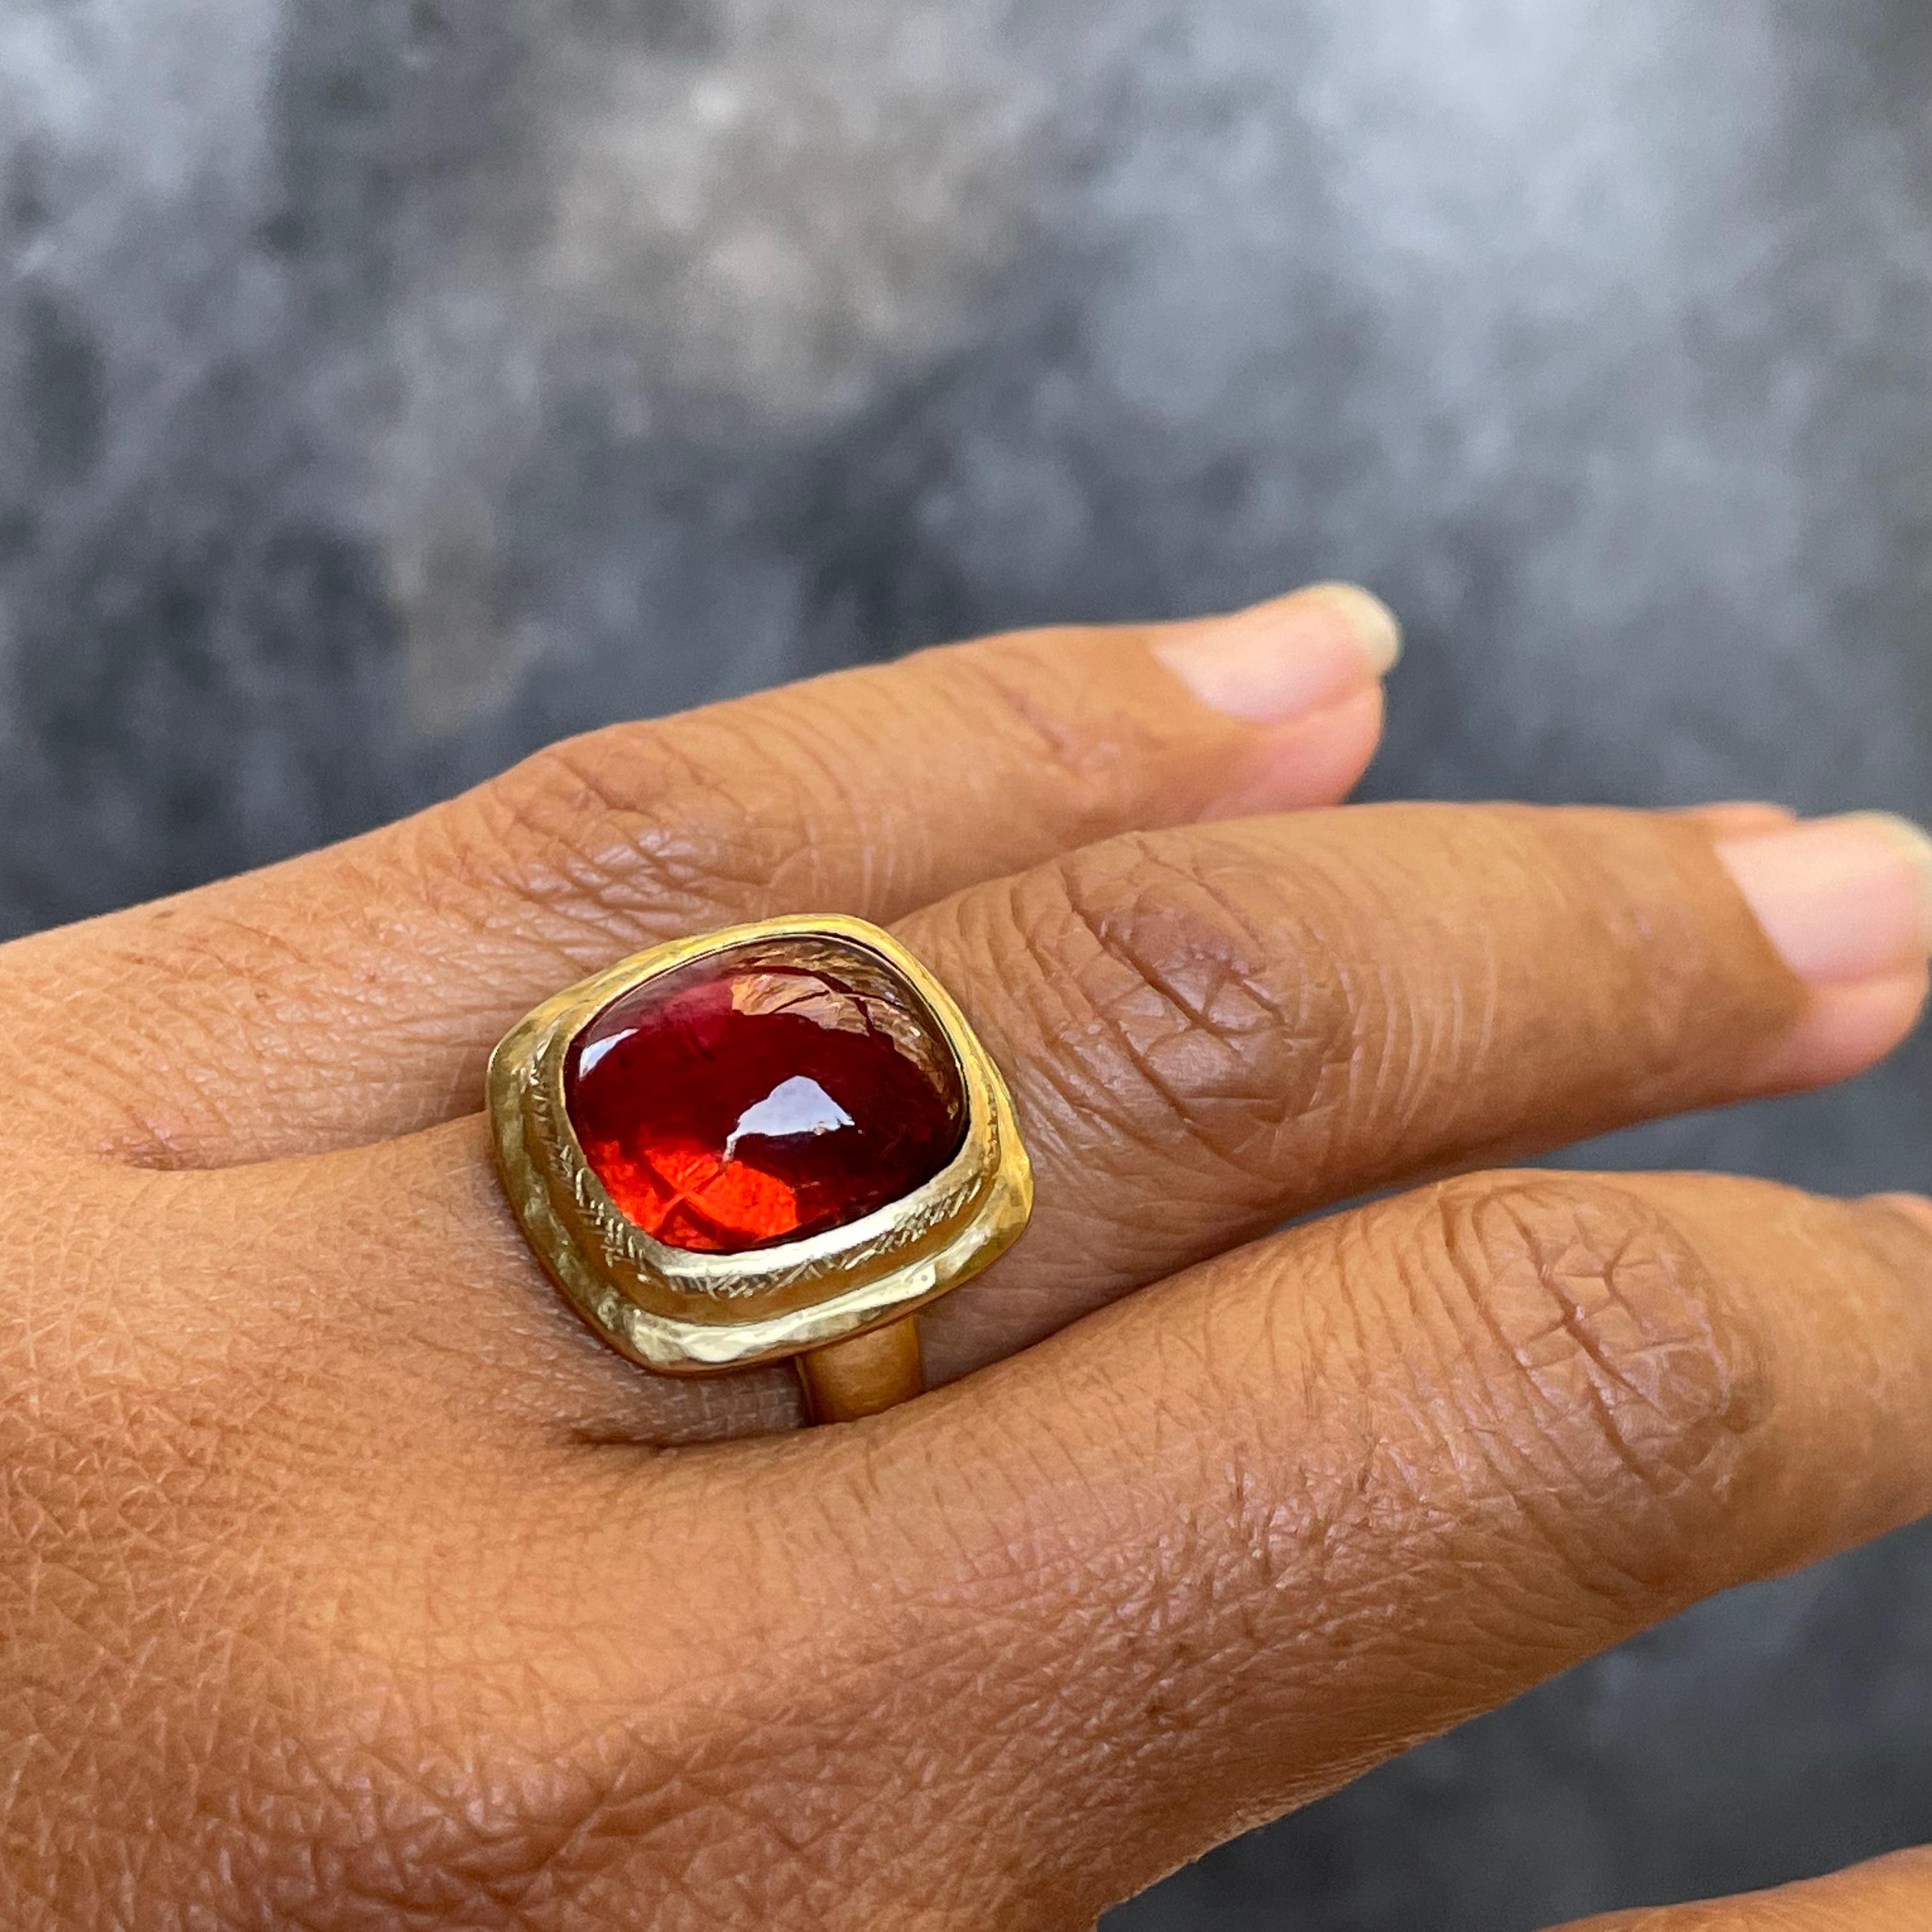 A beautiful VERY clear  12 x 14 mm cushion Tourmaline cabochon in an attractive reddish-pink shade is set surrounded by a stepped bezel with cross thatched accents on a comfortable tapered 18k band, all with matte-finish.  This is a really NICE